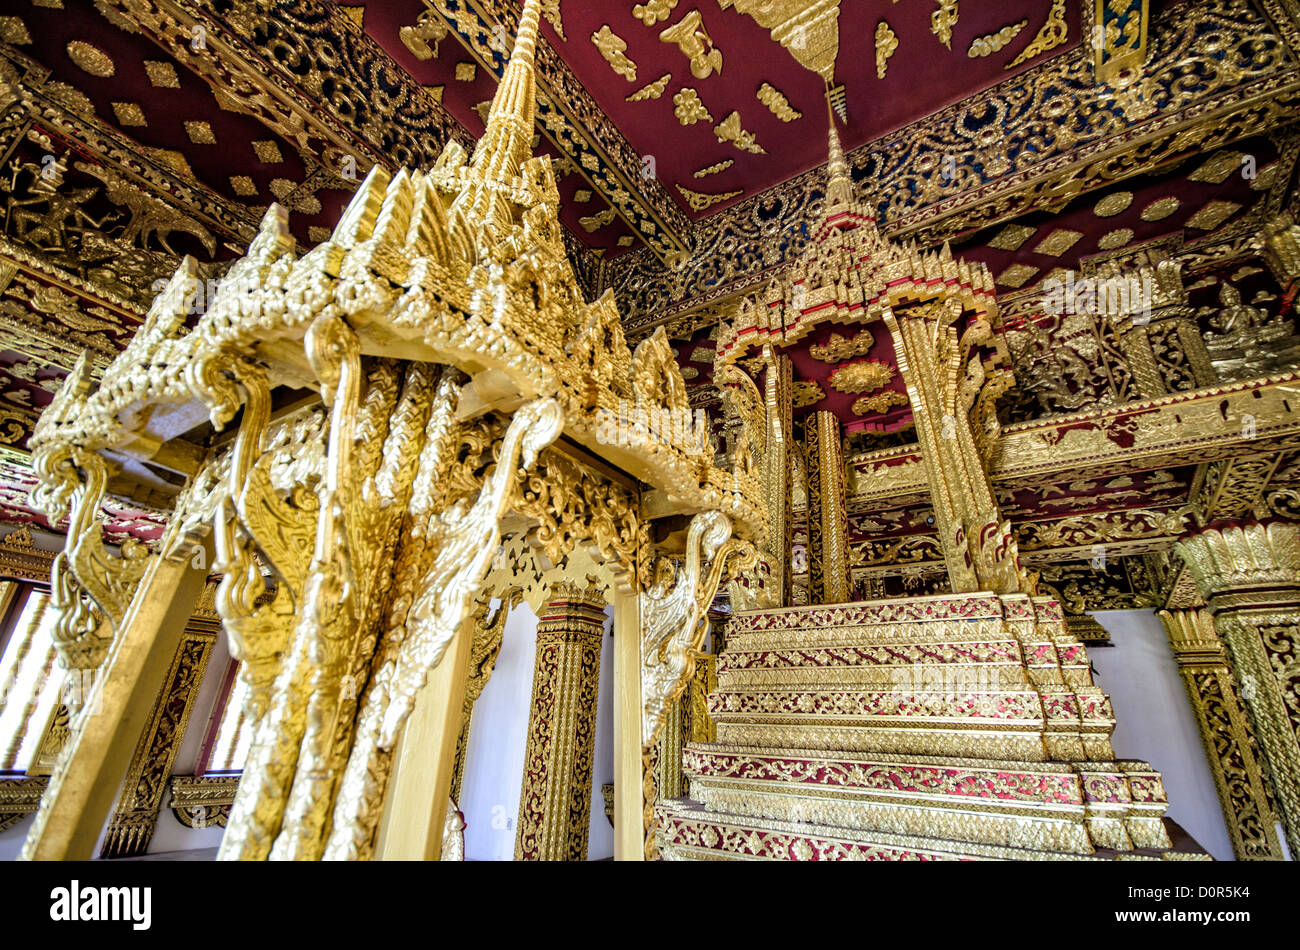 LUANG PRABANG, Laos - The ornate interior of Haw Pha Bang (or Palace Chapel) at the Royal Palace Museum in Luang Prabang, Laos. The chapel sits at the northeastern corner of the grounds. Construction started in 1963. Stock Photo